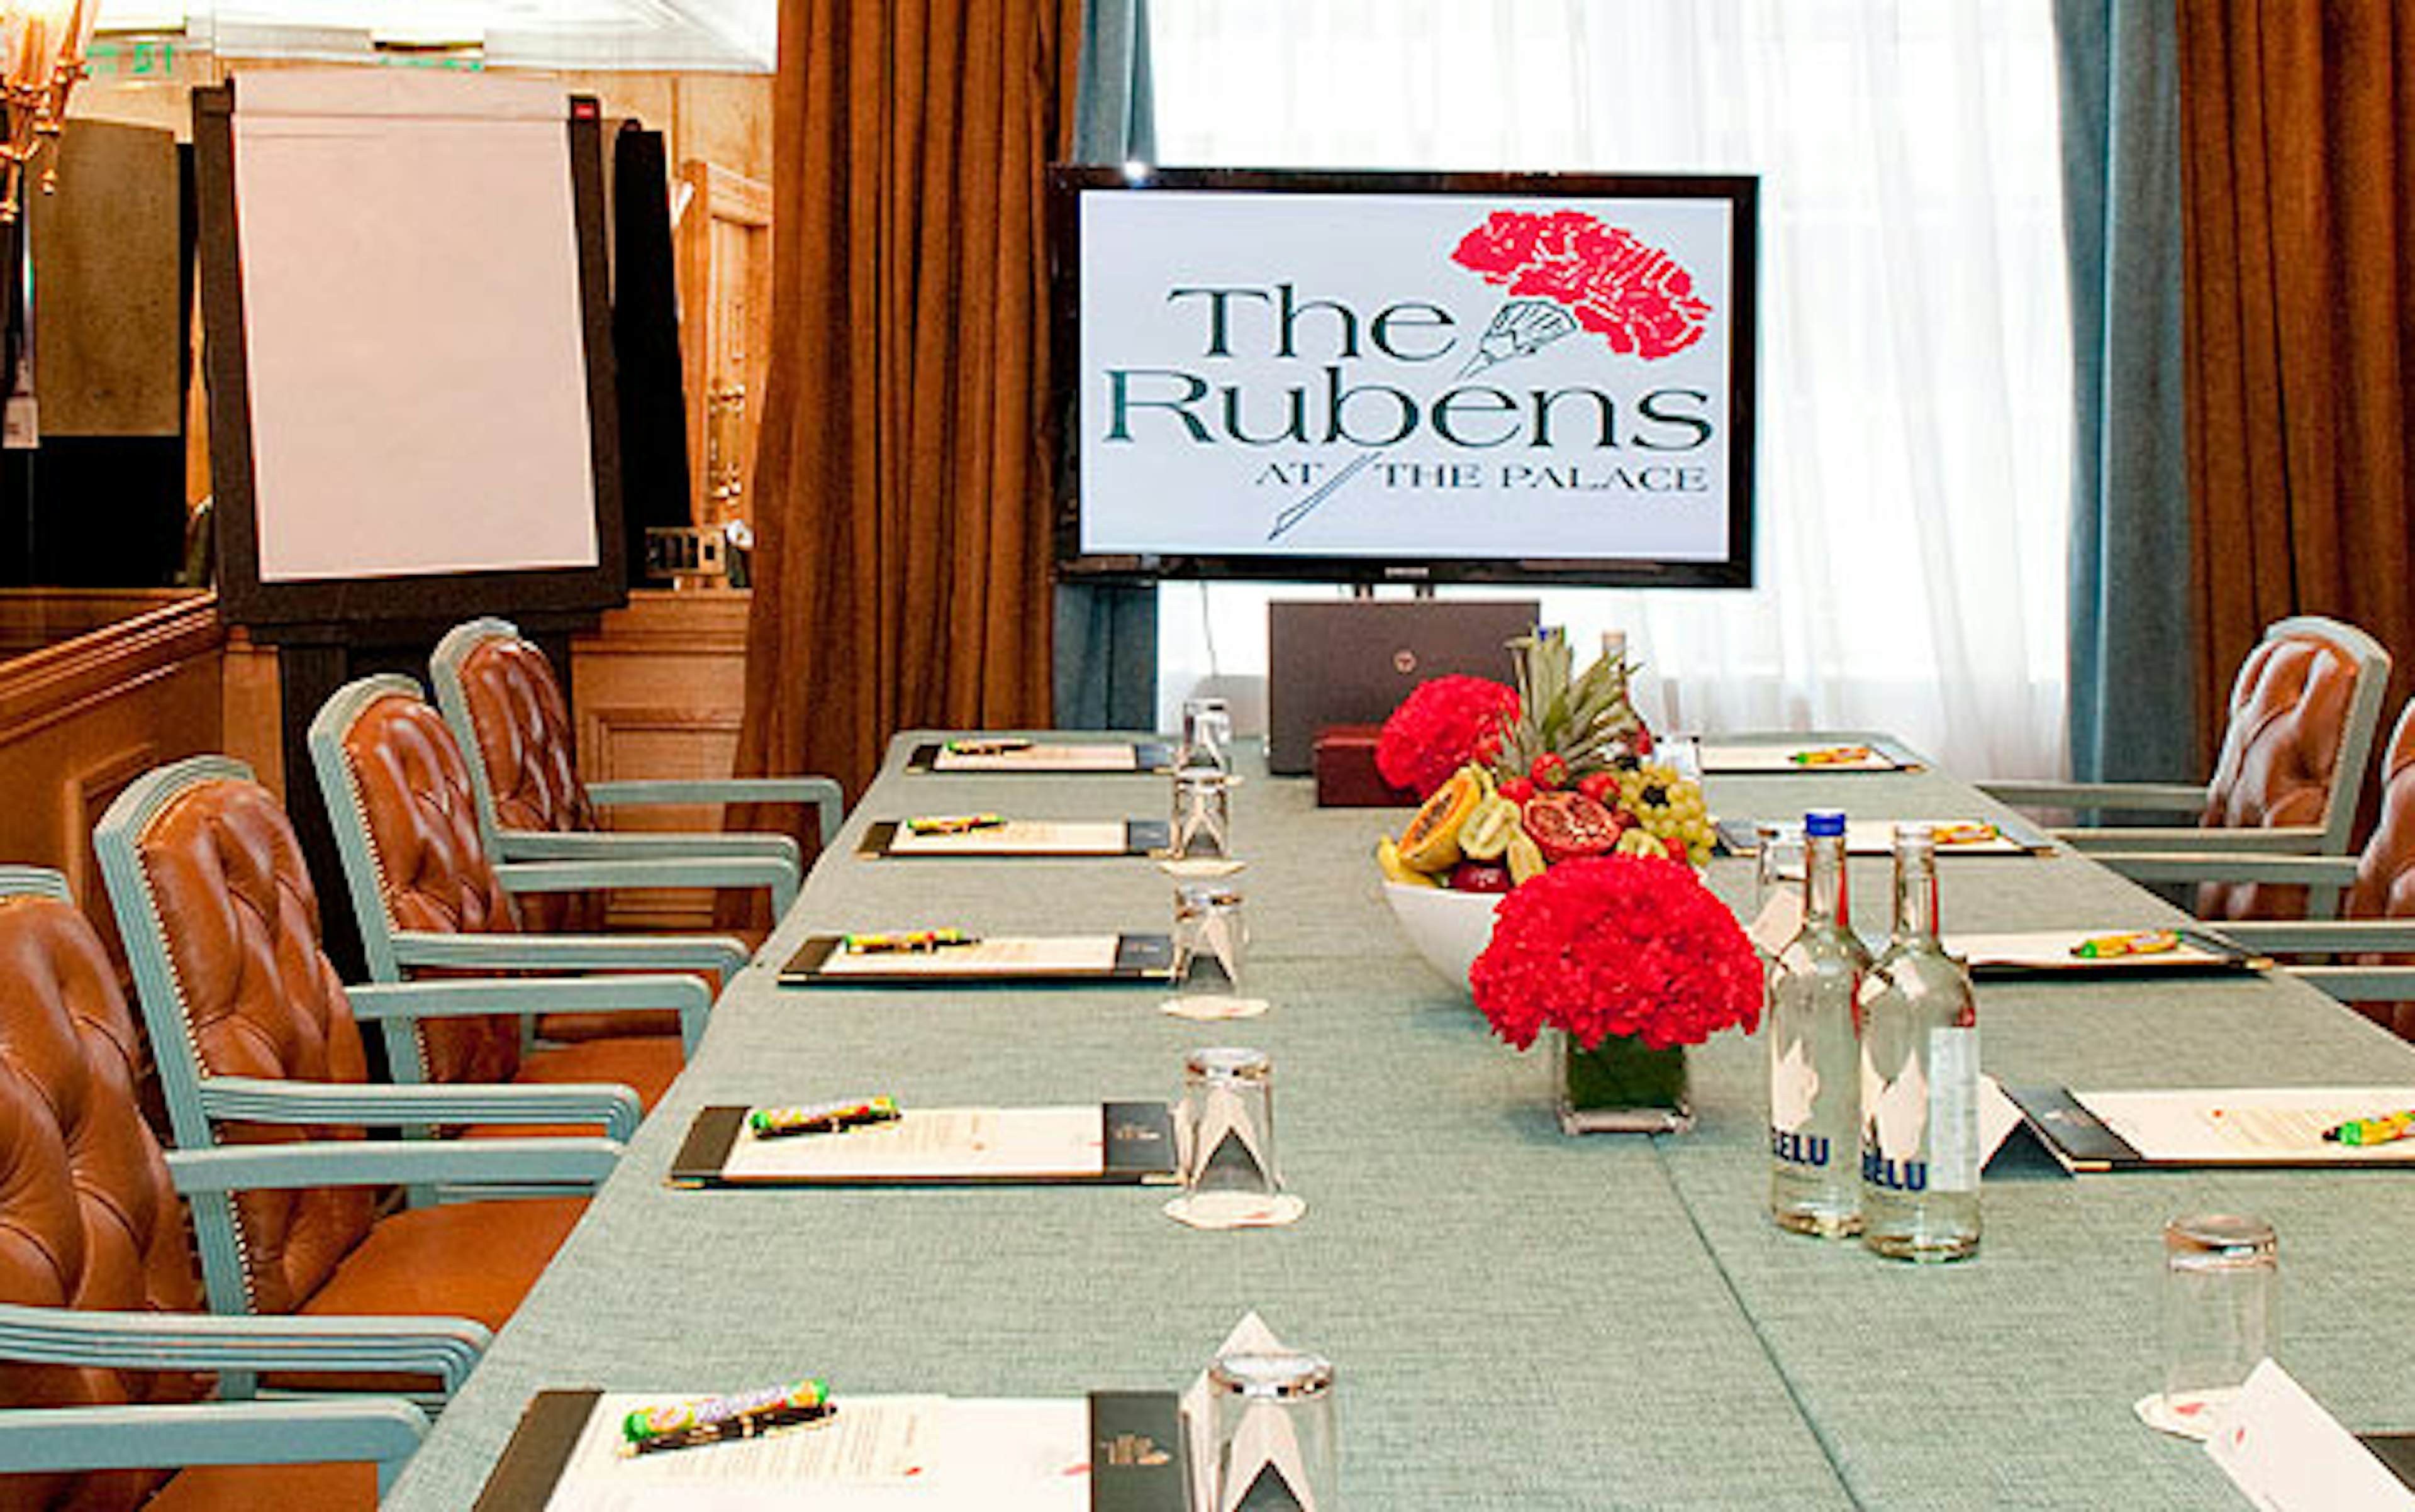 The Rubens at the Palace - Rubens Suite image 1